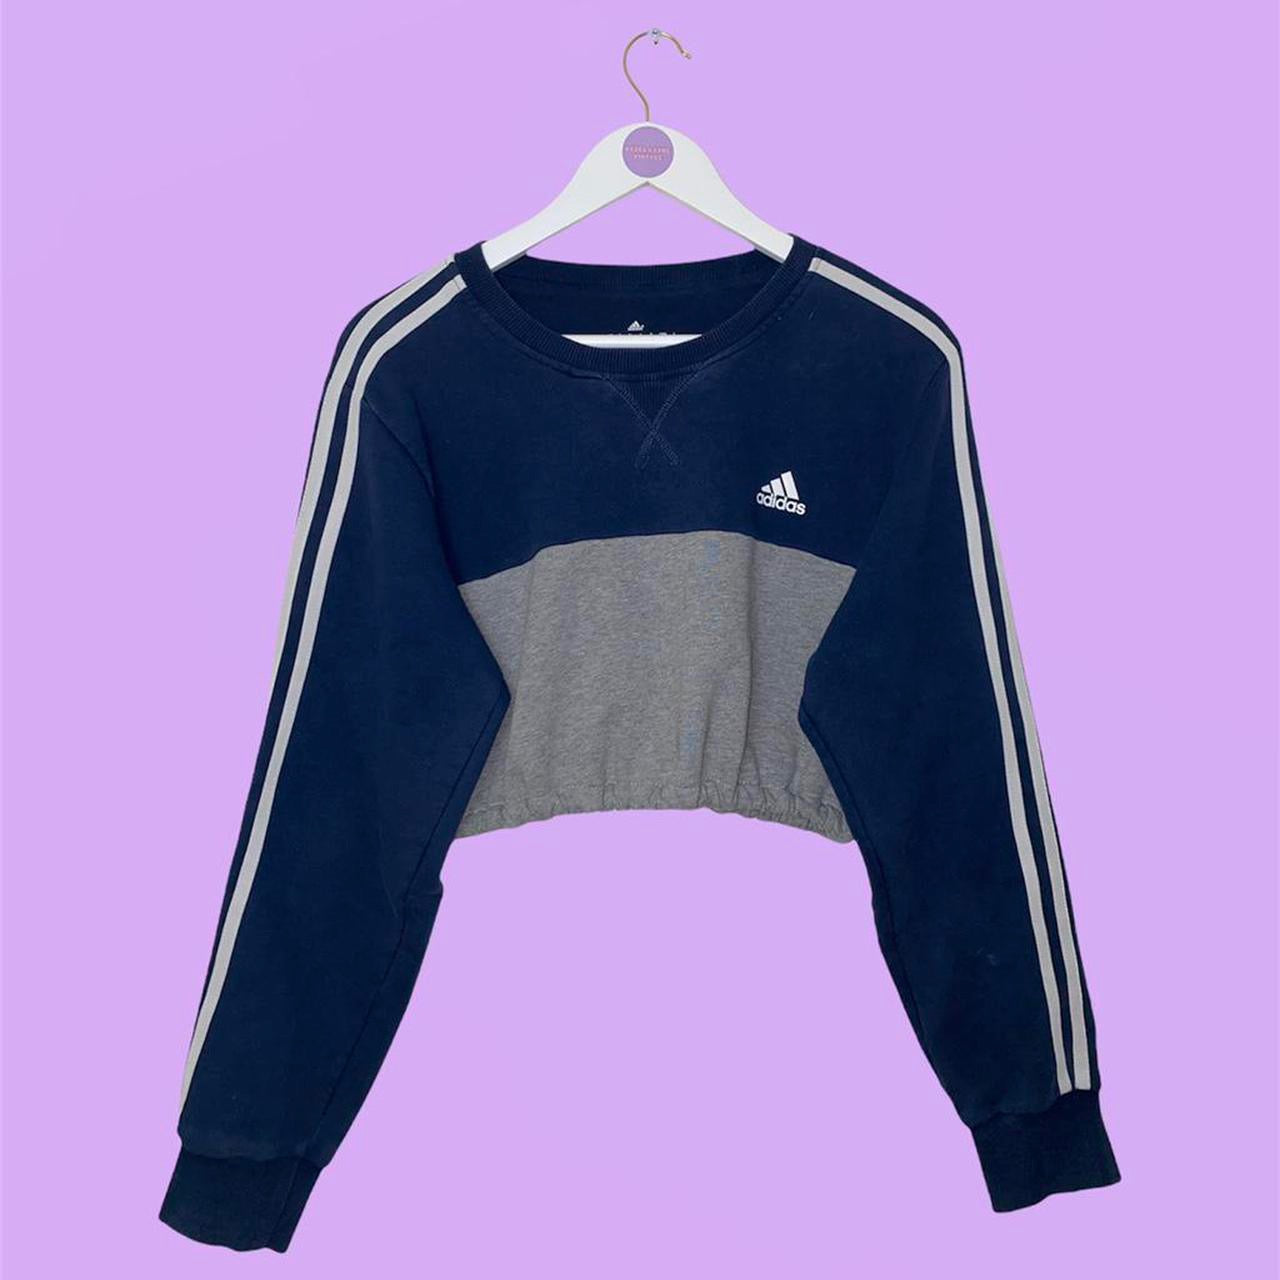 navy and grey cropped sweatshirt with white adidas text and symbol logo on chest with 3 stripes on sleeves shown on a white clothes hanger on a lilac background